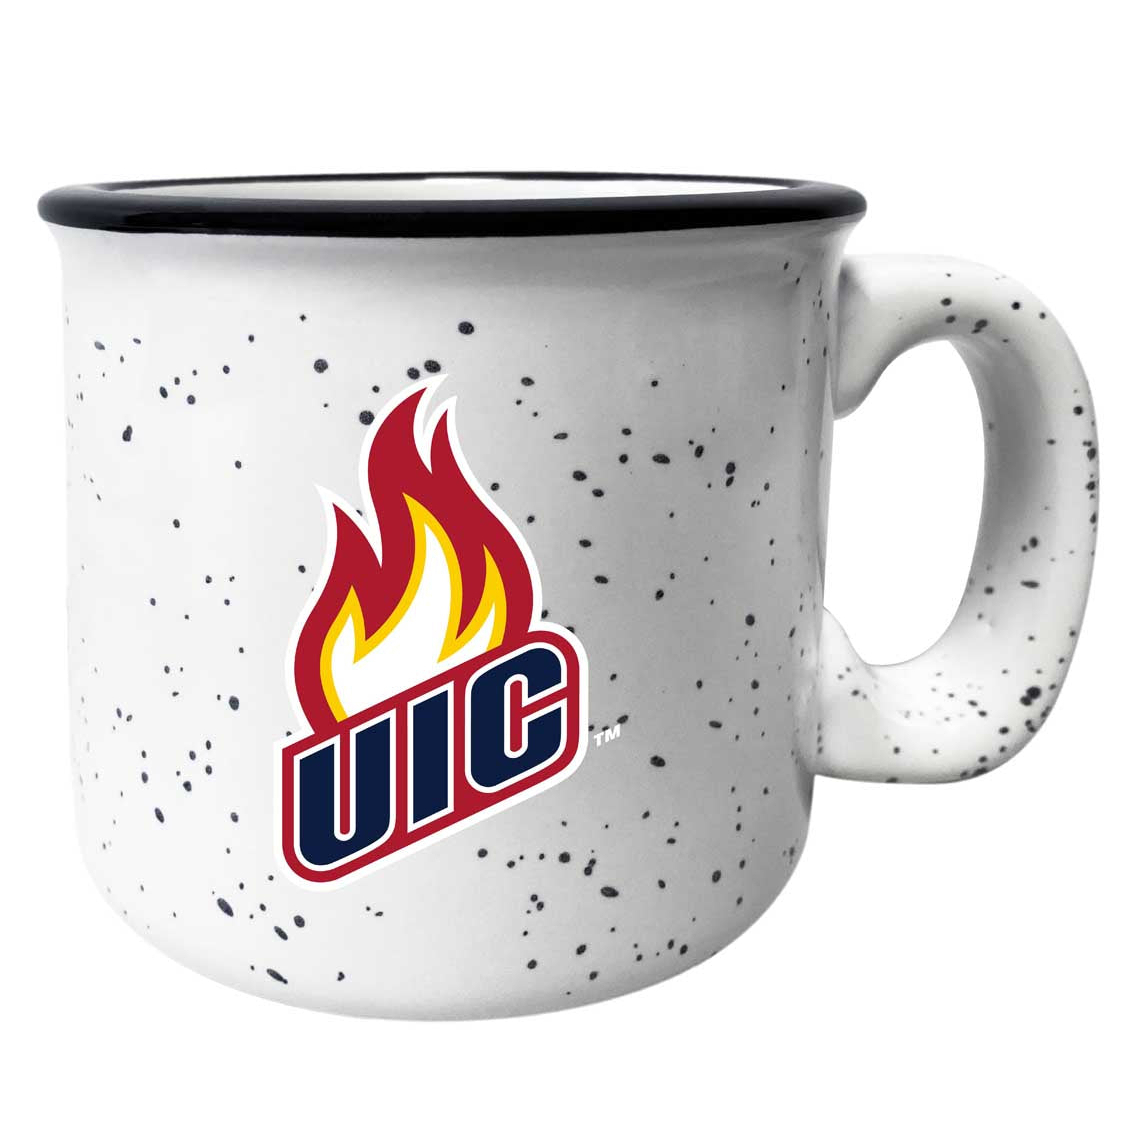 University Of Illinois At Chicago Speckled Ceramic Camper Coffee Mug - Choose Your Color - Gray